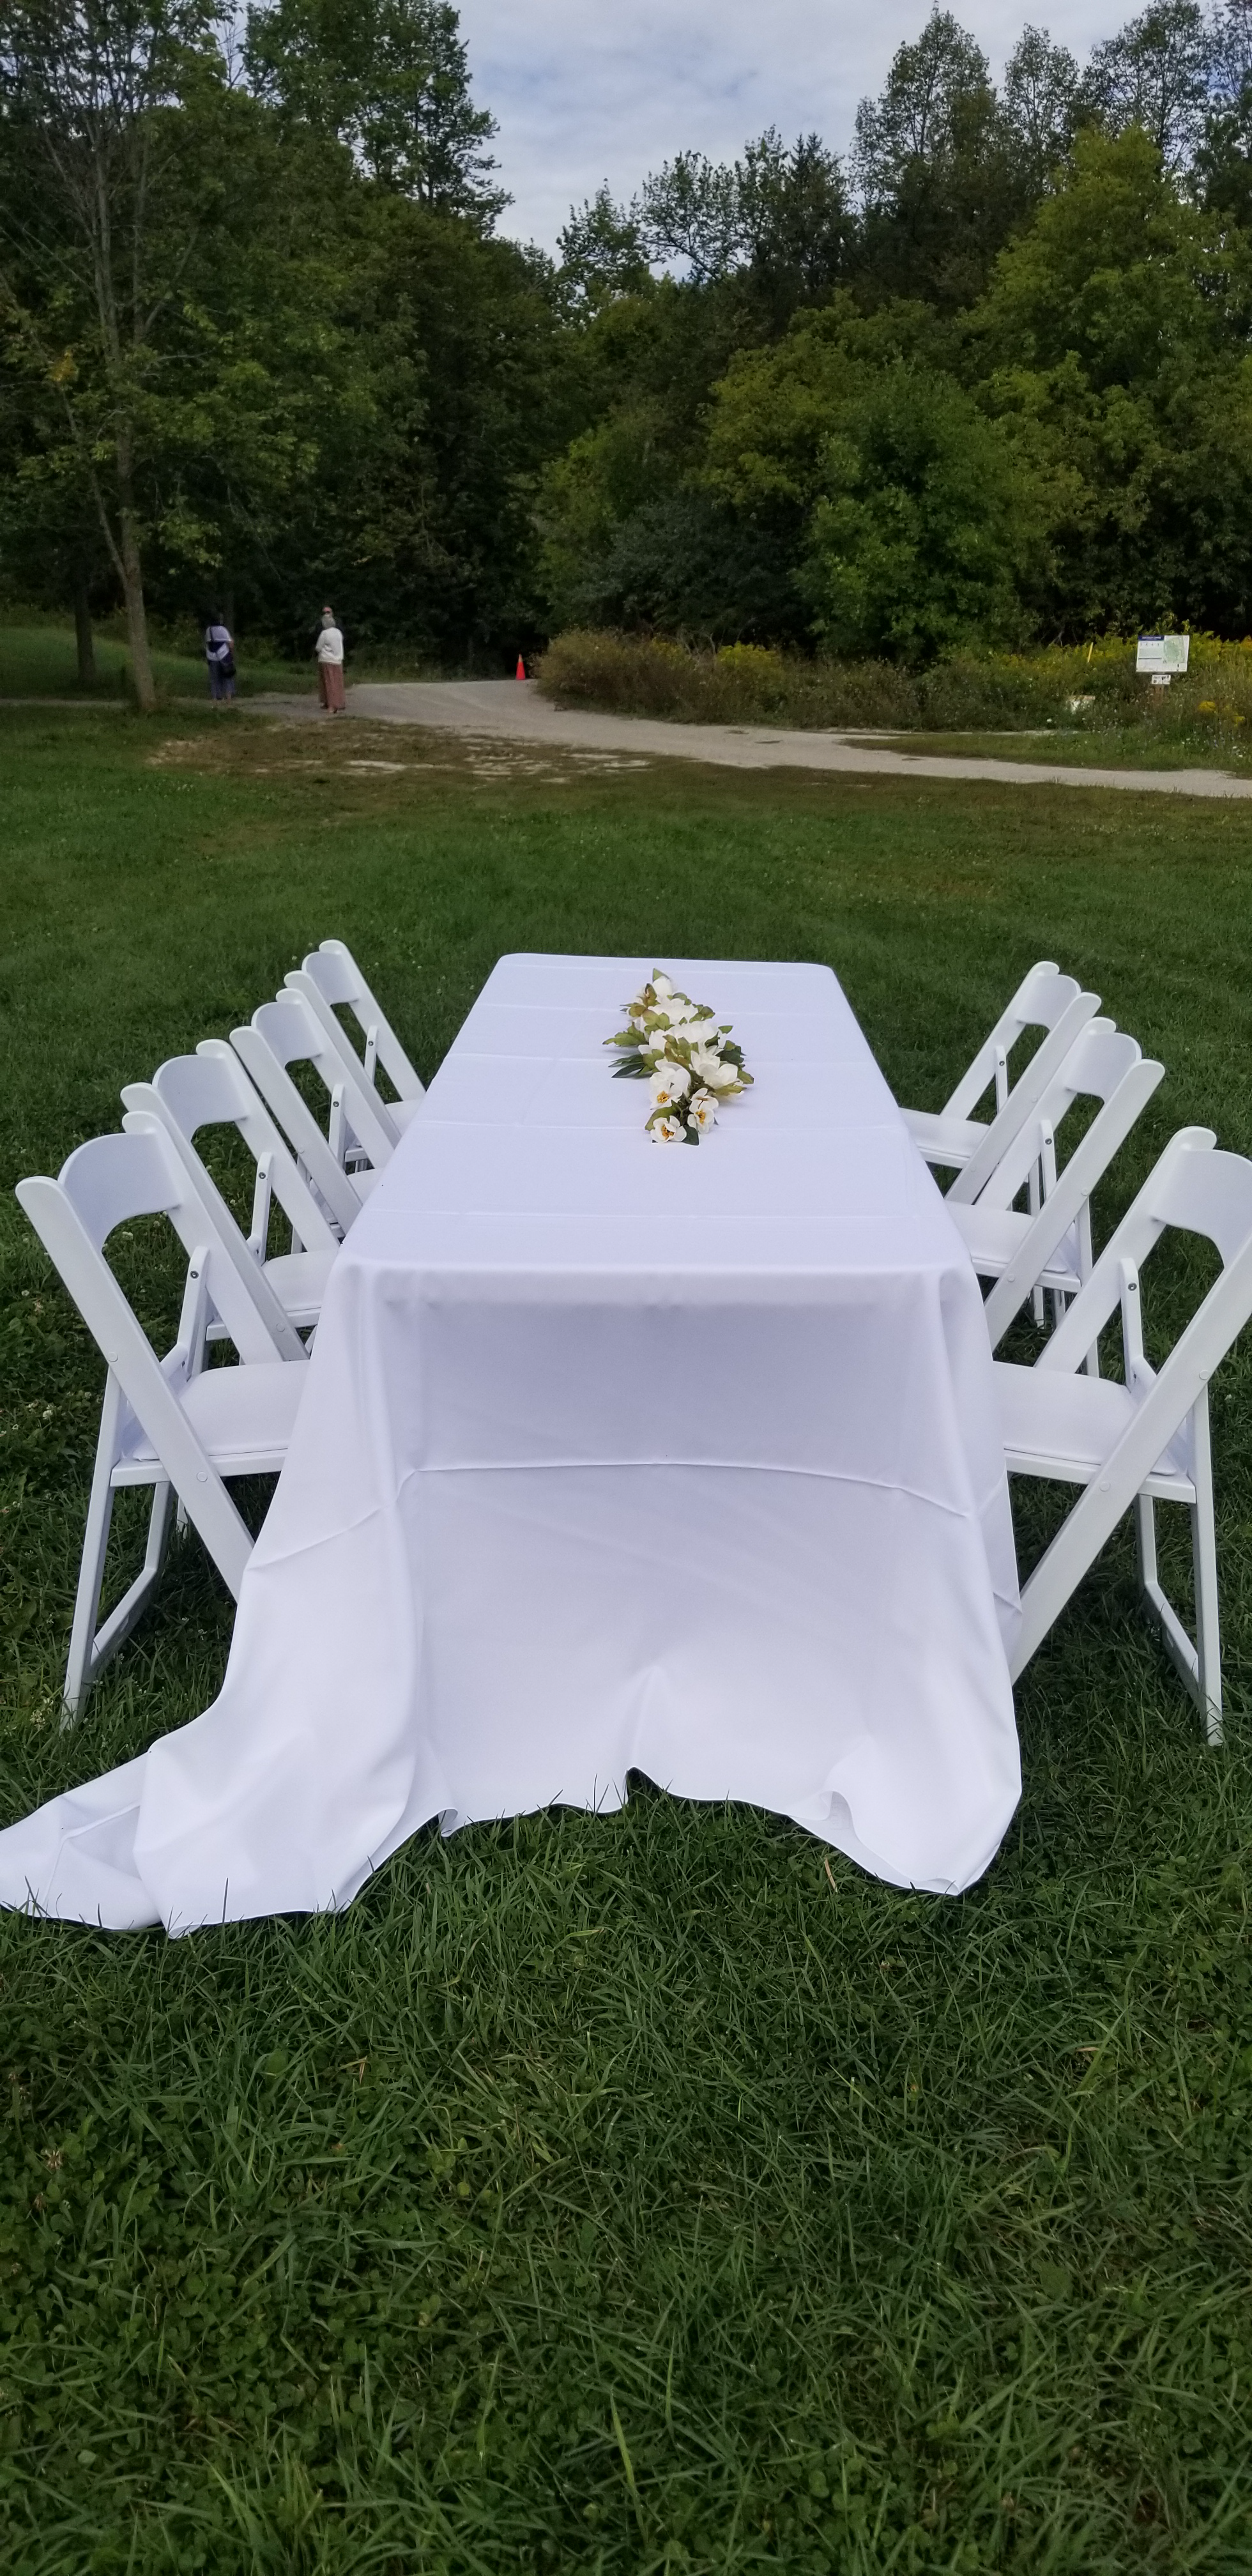 8 foot by 30 inch table with 90 inch by 156 inch white tablecloth on it, a flower arrangement and 4 of the white resin chairs with padded seats on 2 sides of the table